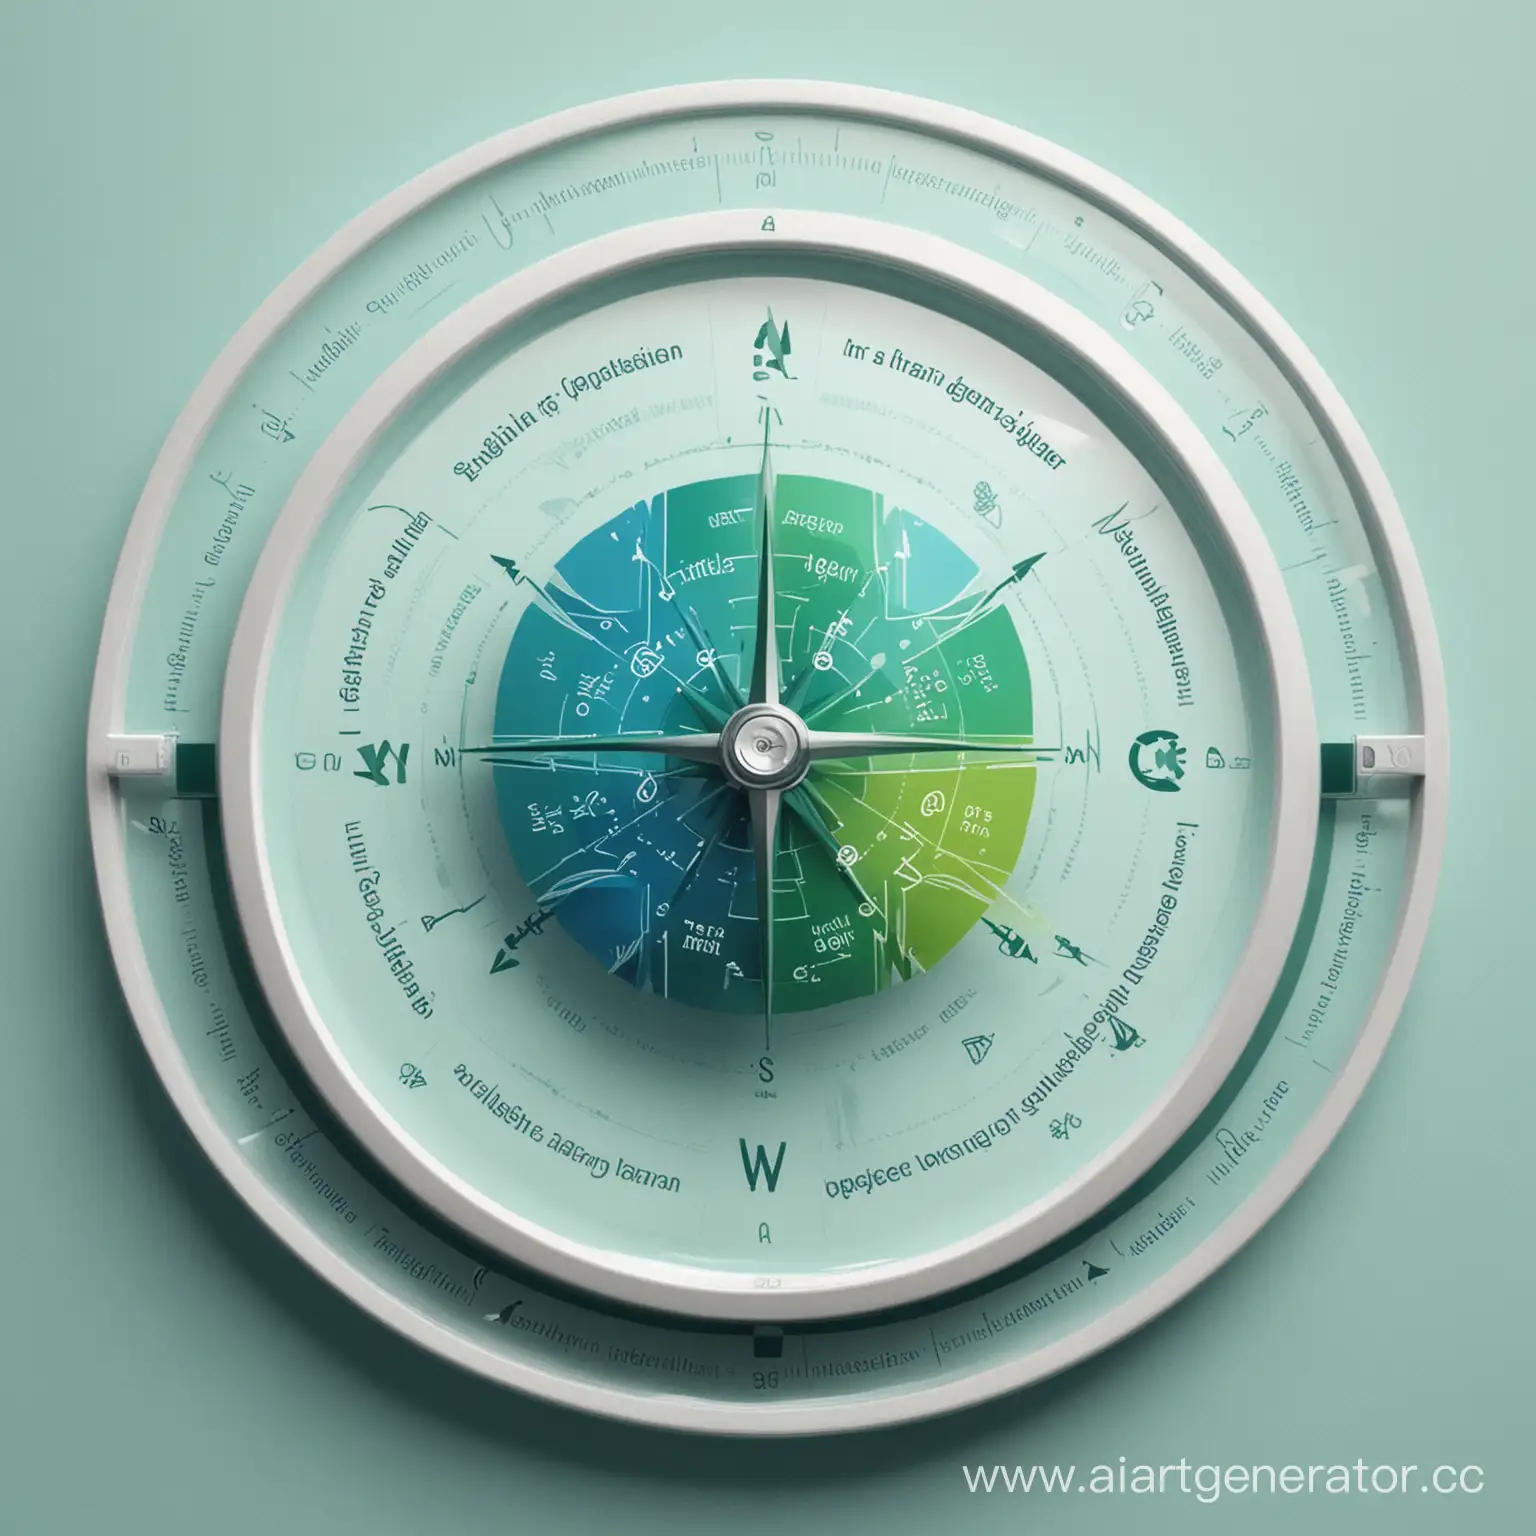 Calm-and-Growth-Interactive-Globe-Application-Design-with-Compass-Navigation